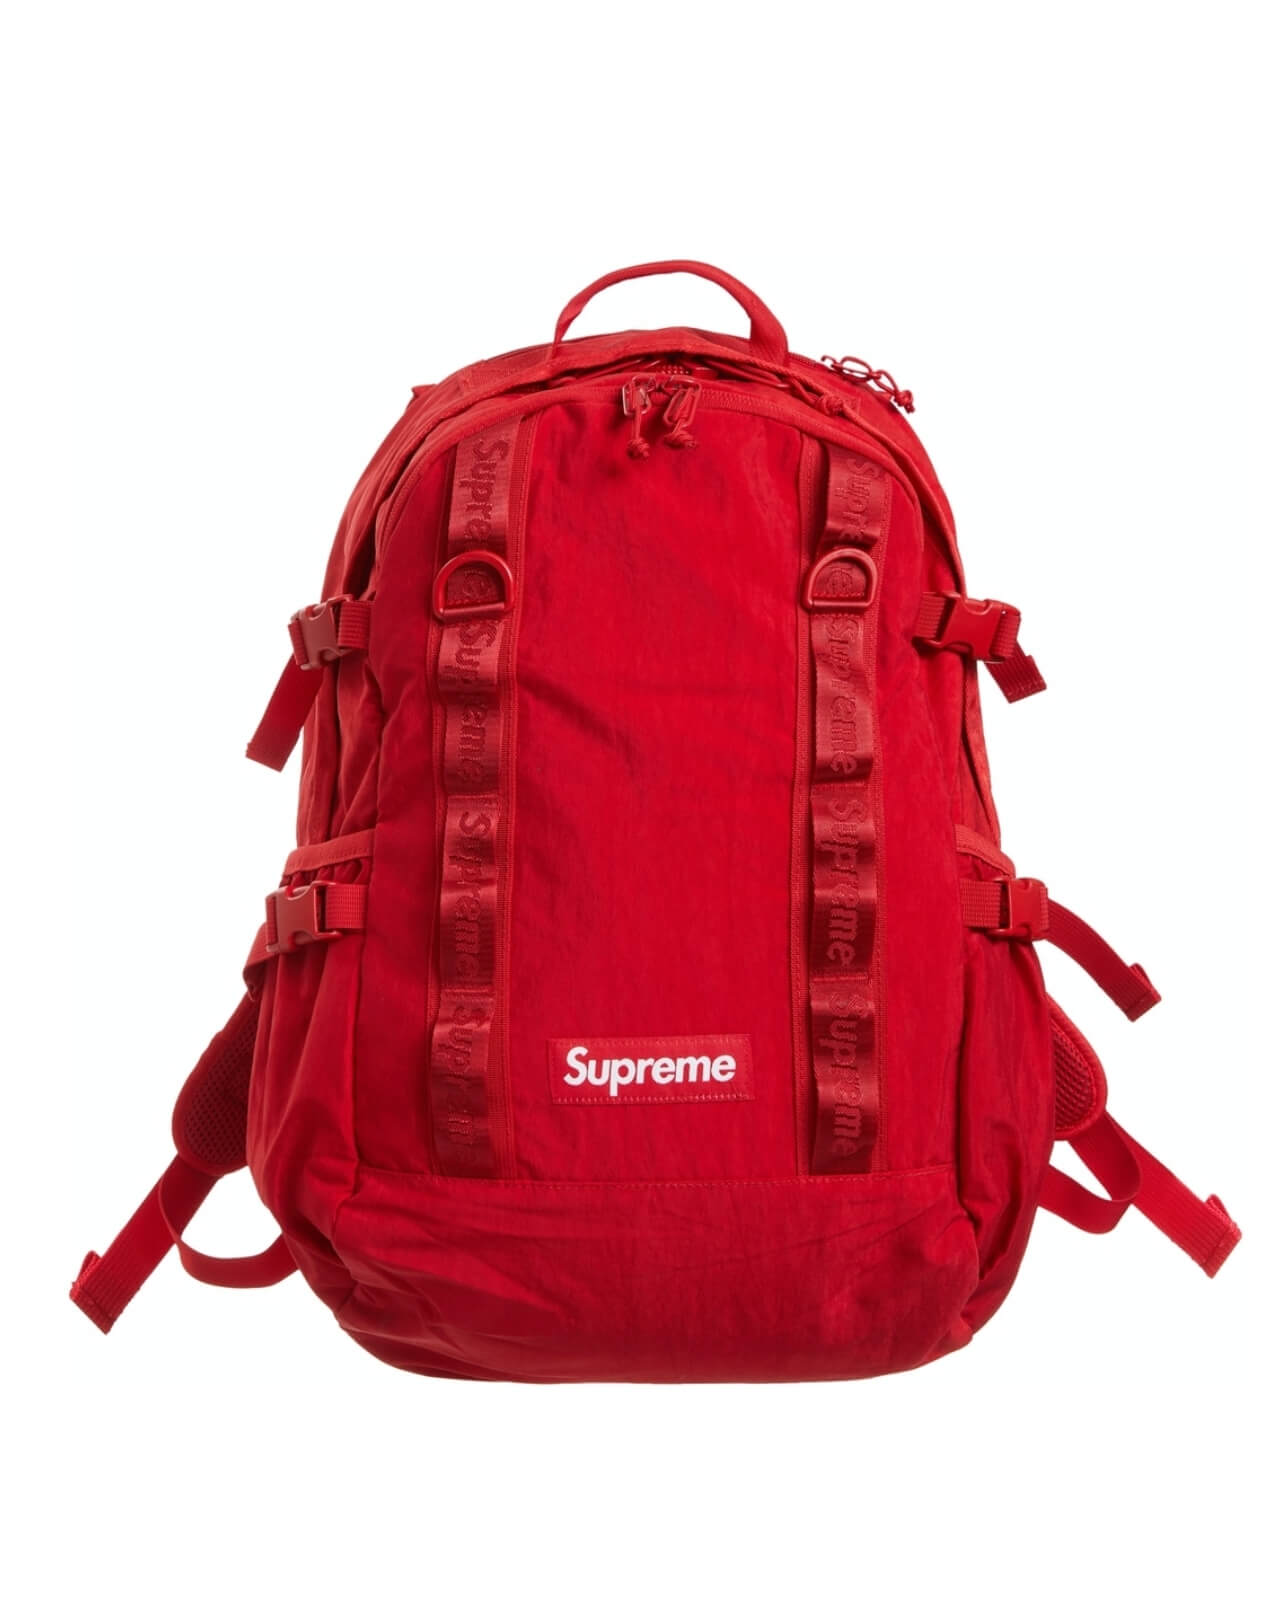 Supreme Backpack Red Color New Design Great Details 100 % Authentic With Receipt